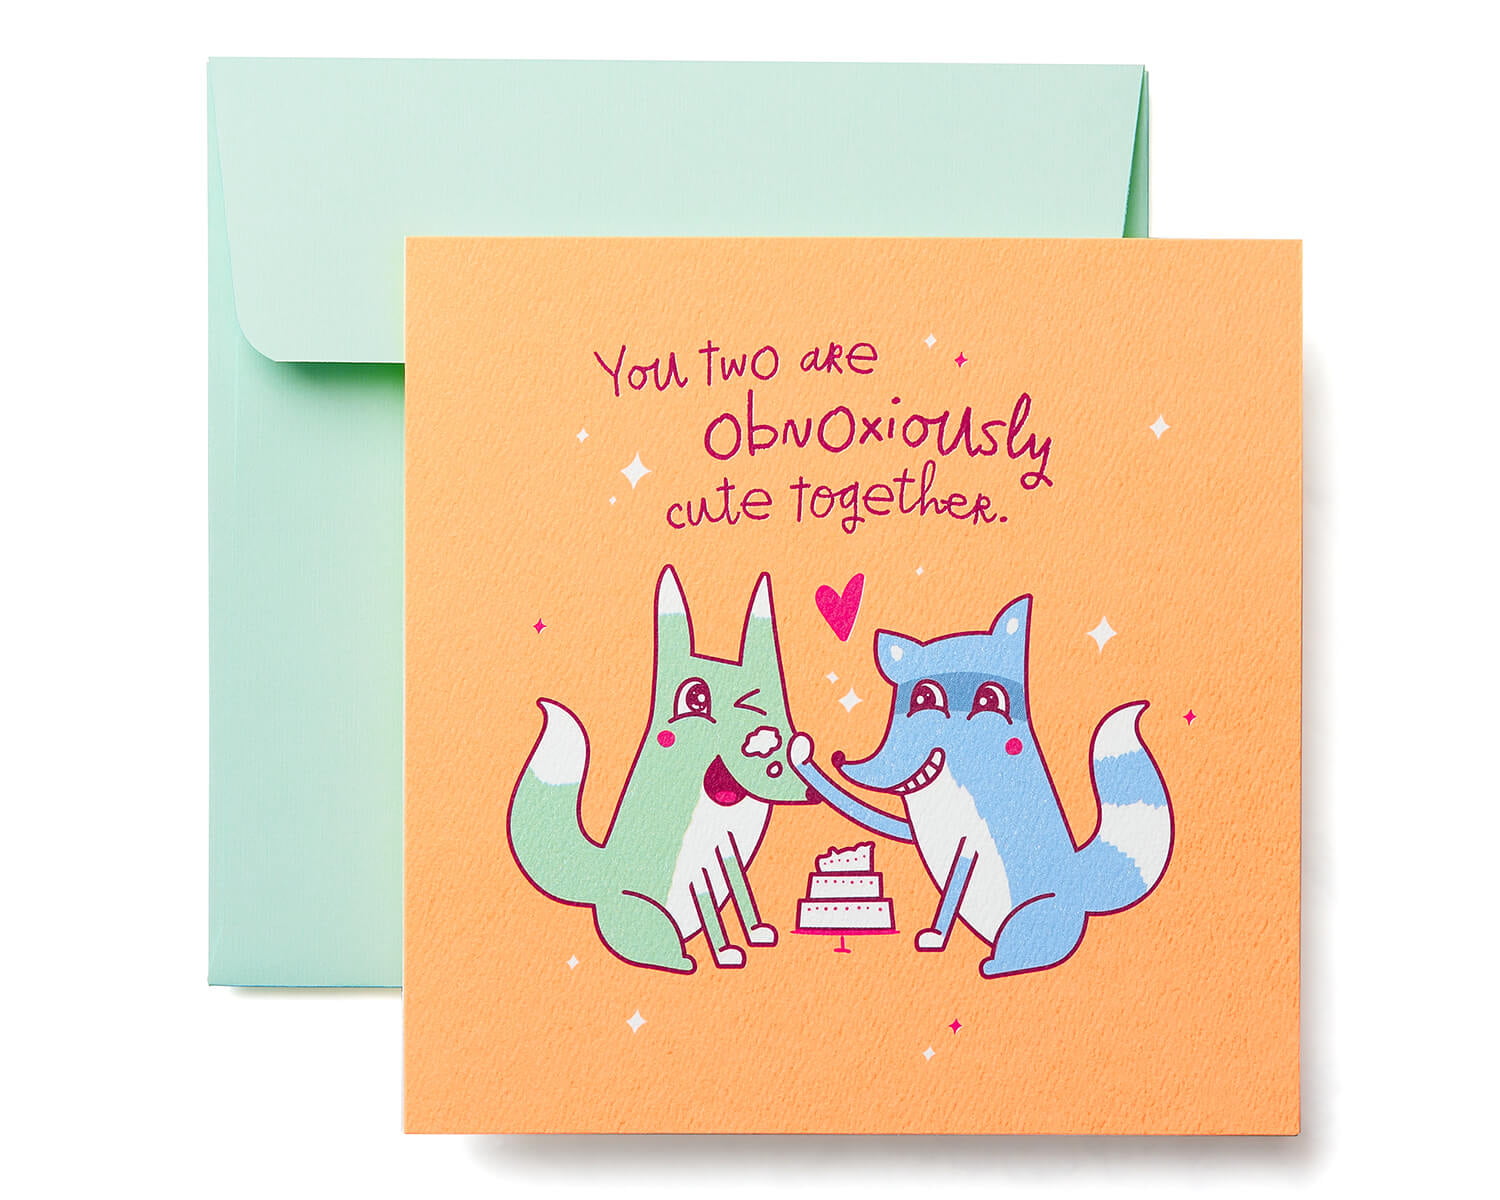 American Greetings Funny Obnoxiously Cute Greeting Card for Couple -  Engagement, Wedding, Anniversary 